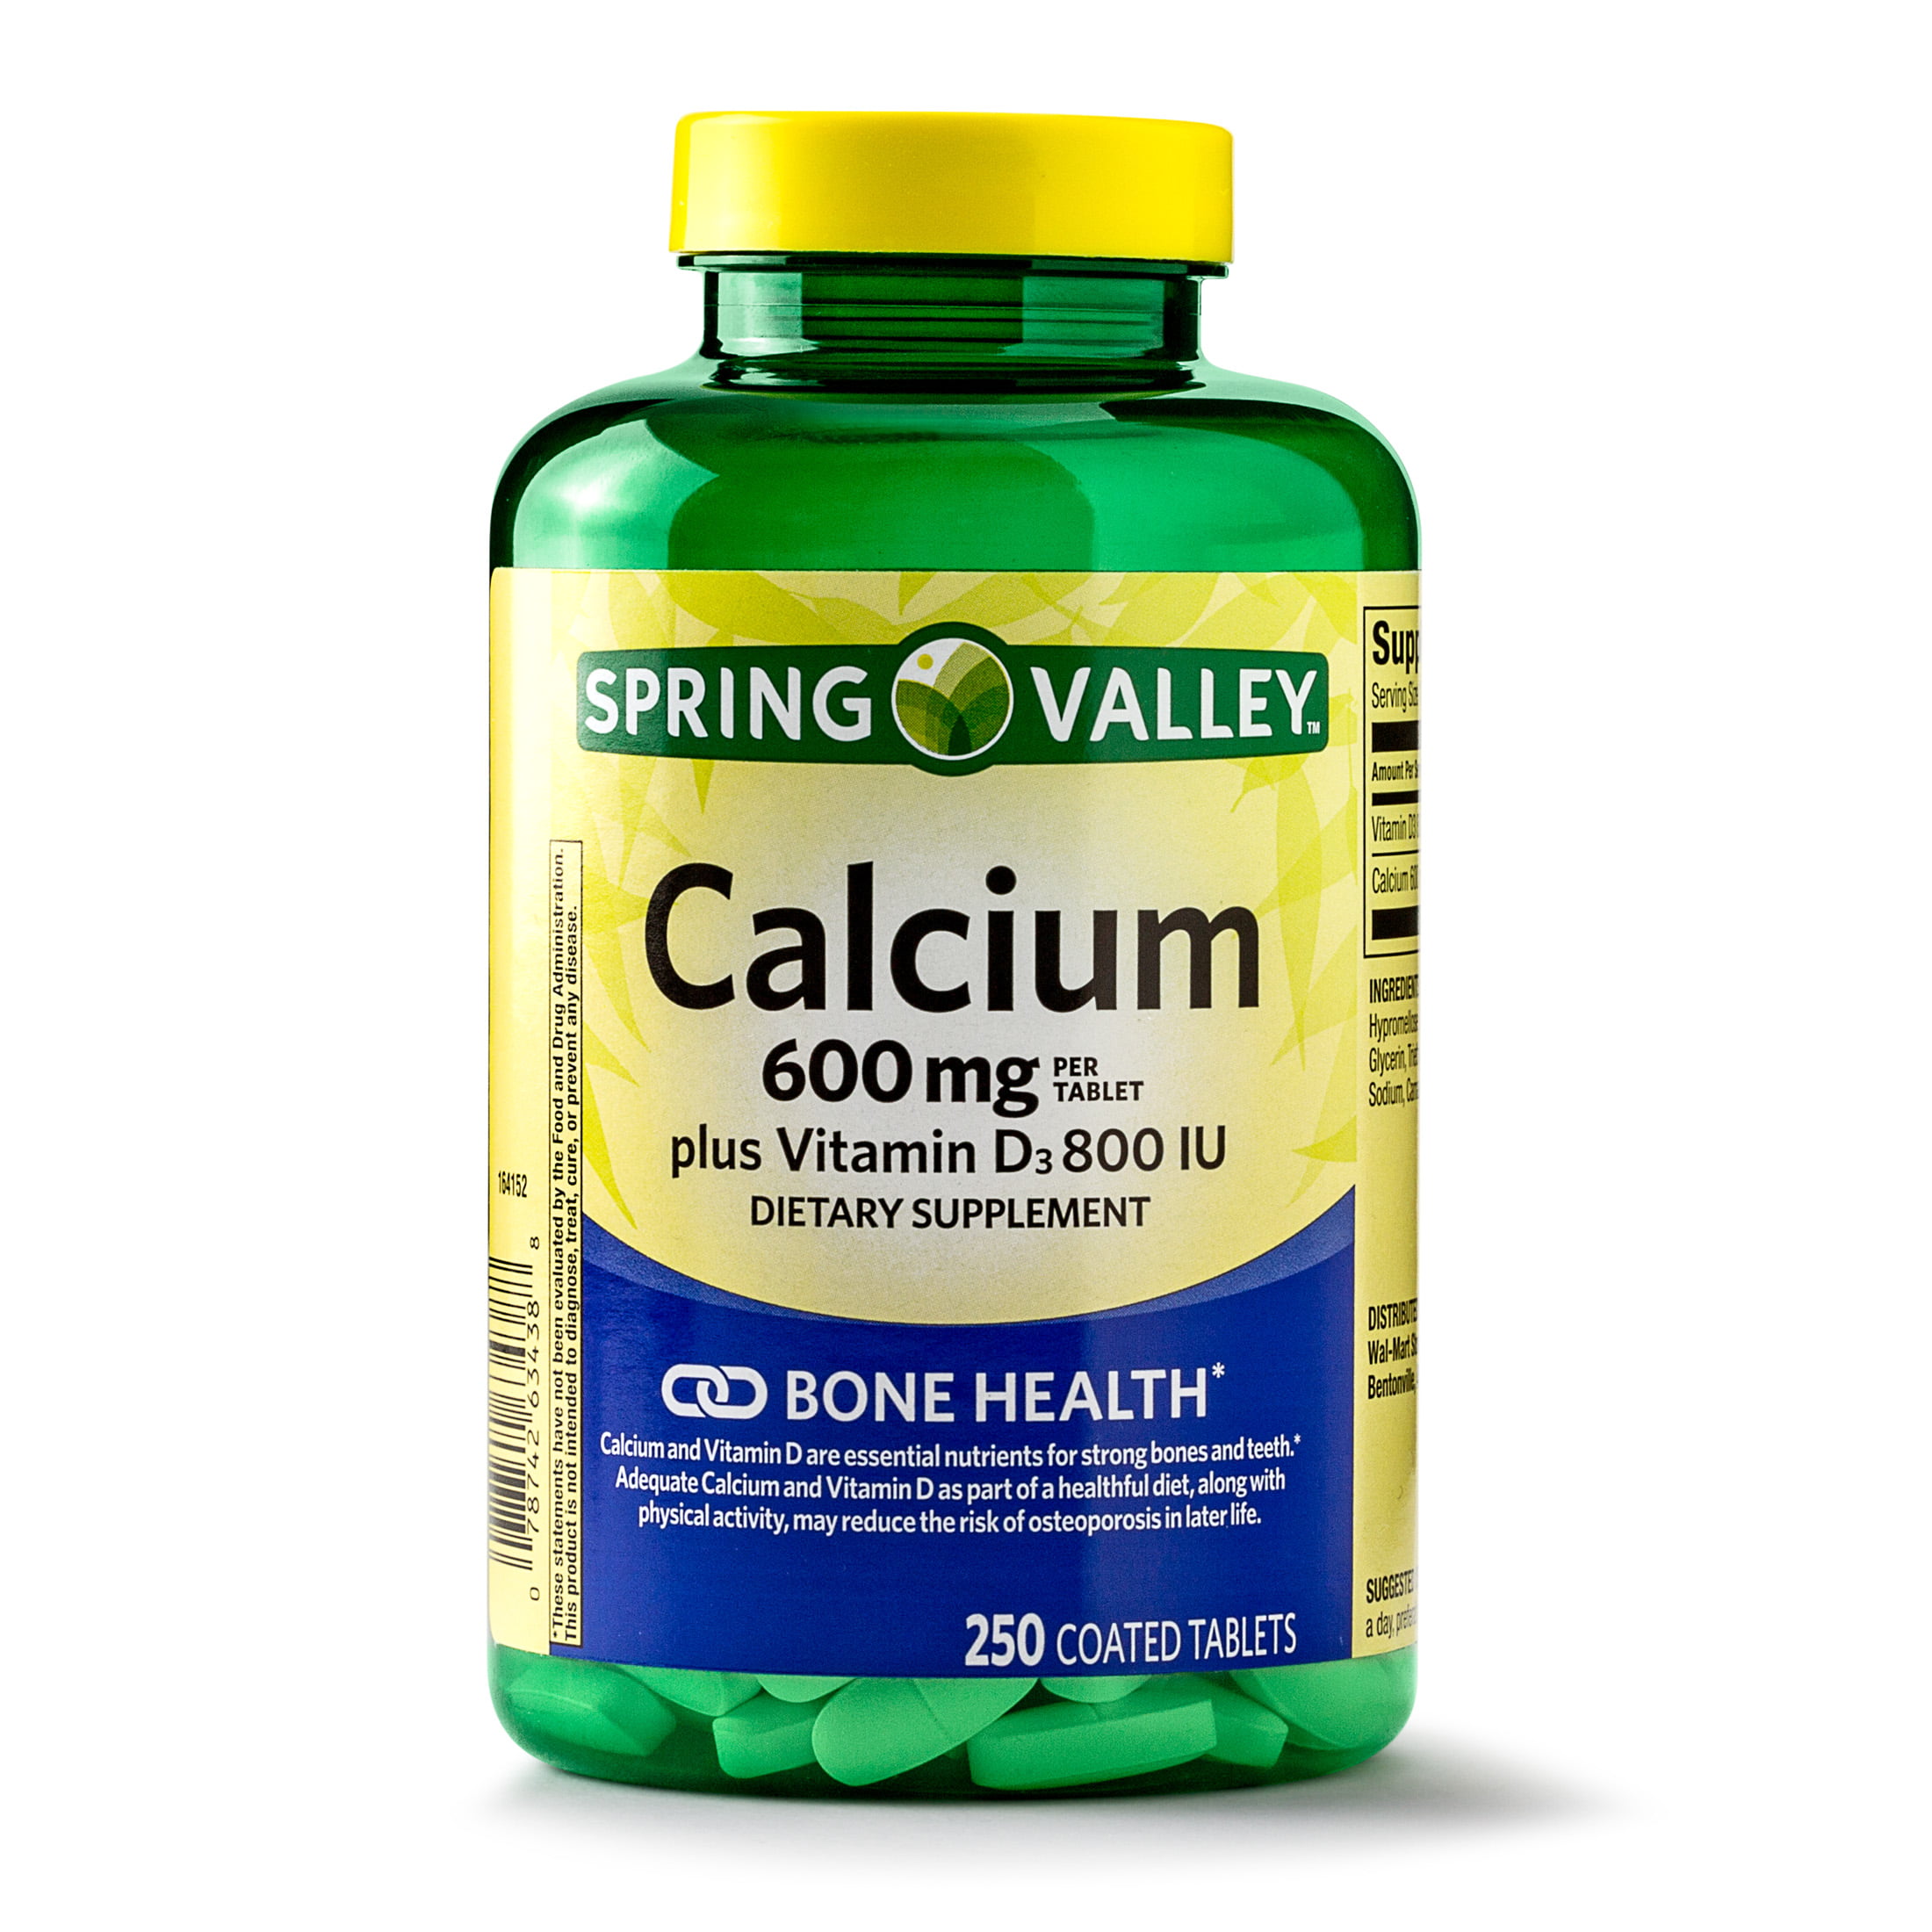 Spring Valley Calcium Plus Vitamin D Coated Tablets 600 Mg 250 Ct Walmartcom